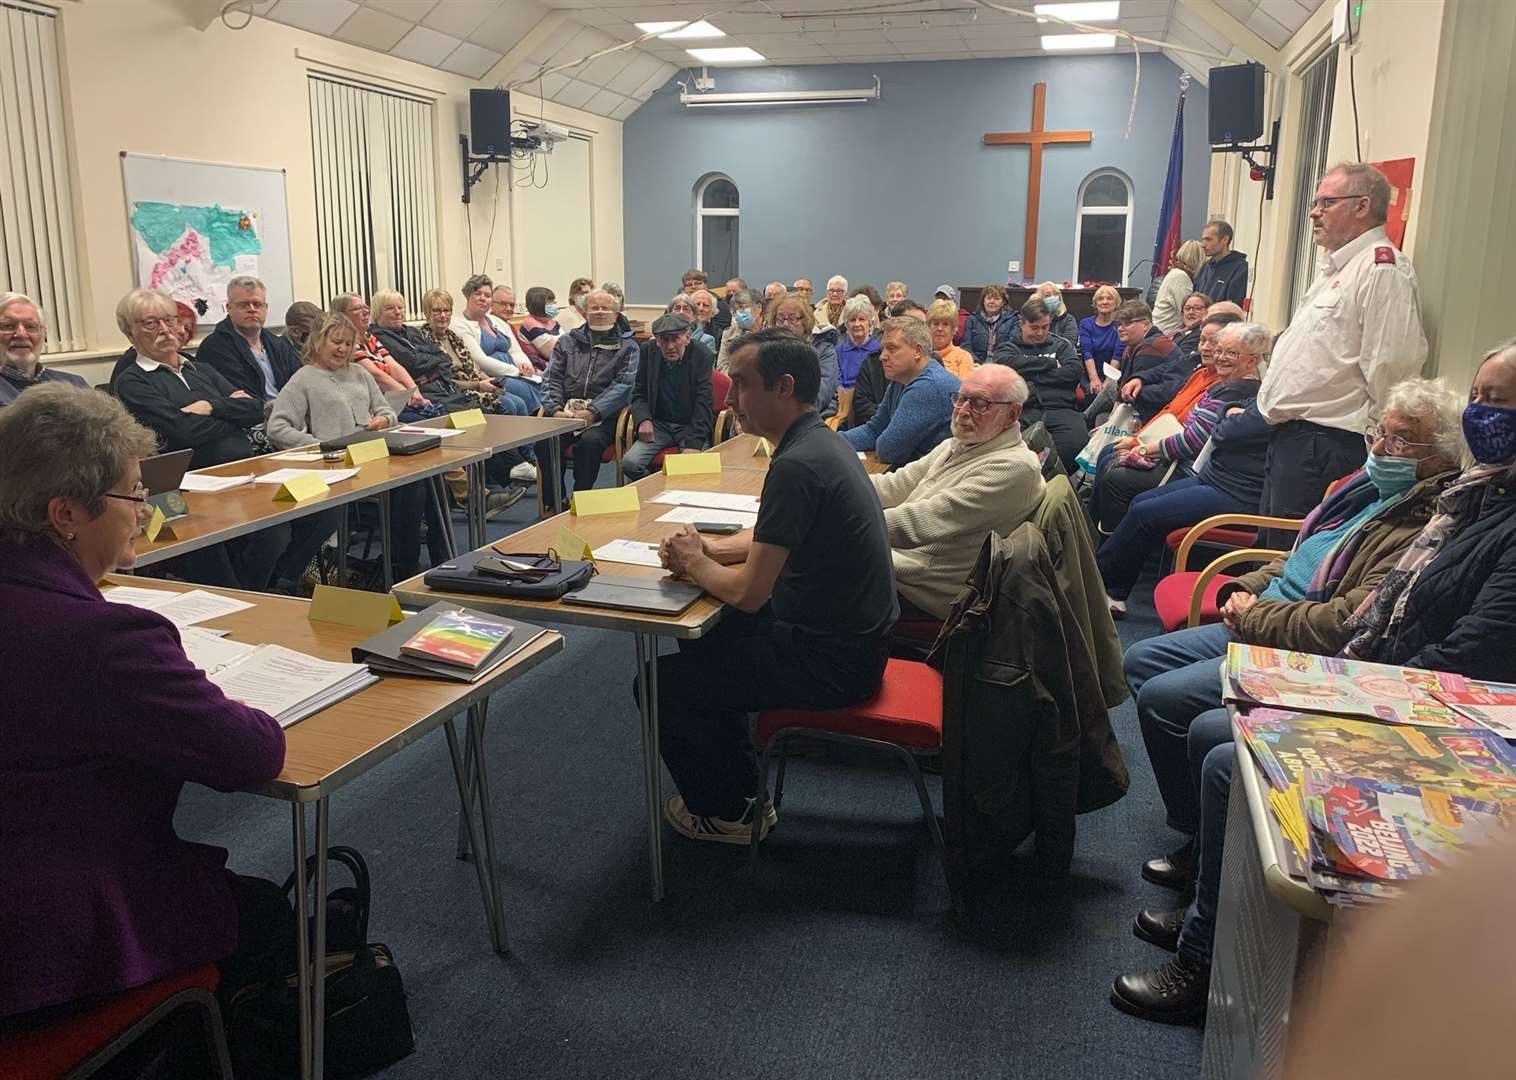 South Willesborough and Newtown residents attended a public meeting about the route closure earlier this year